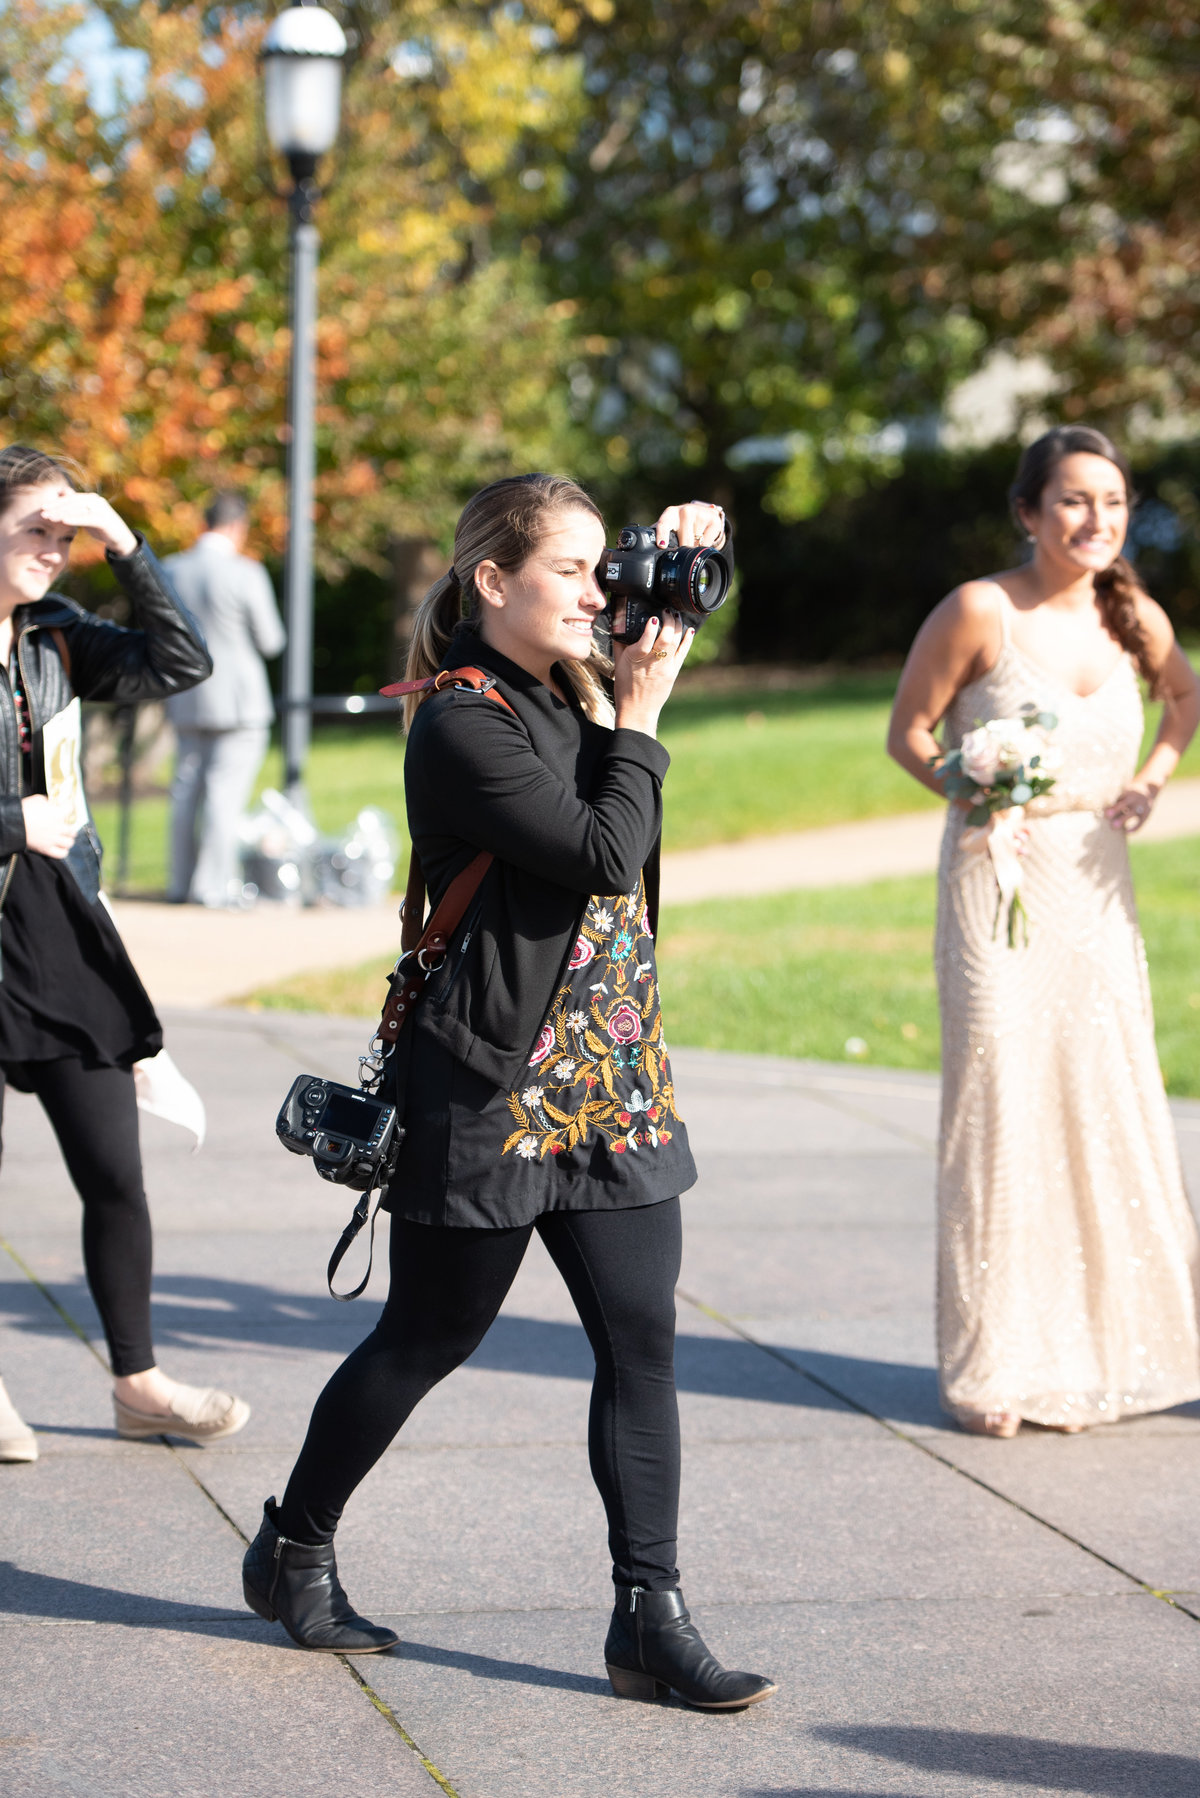 Ashley Mac Photographs - New Jersey Weddings - Behind the Scenes of a Wedding - BTS-79